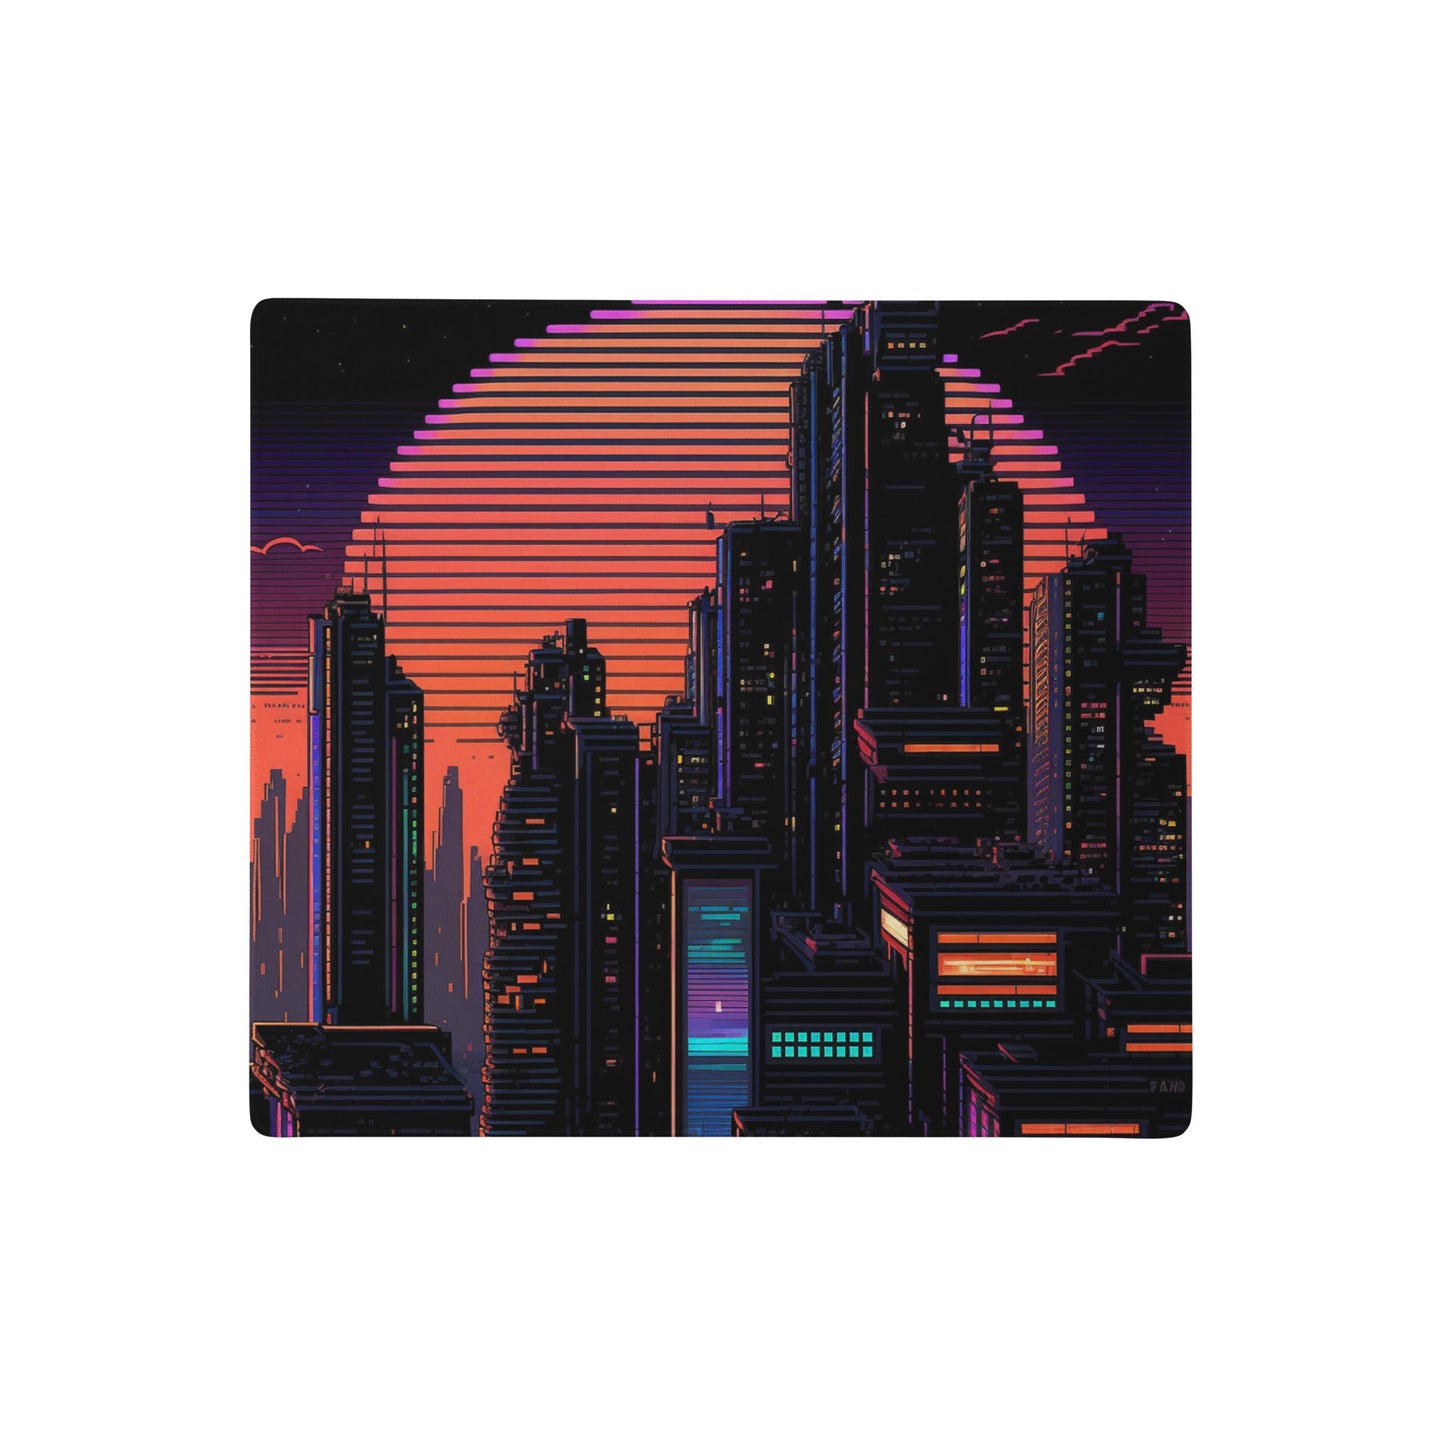 18″×16″ 2 Pixelized CyberCity Elite XXL Gaming Mouse Pad